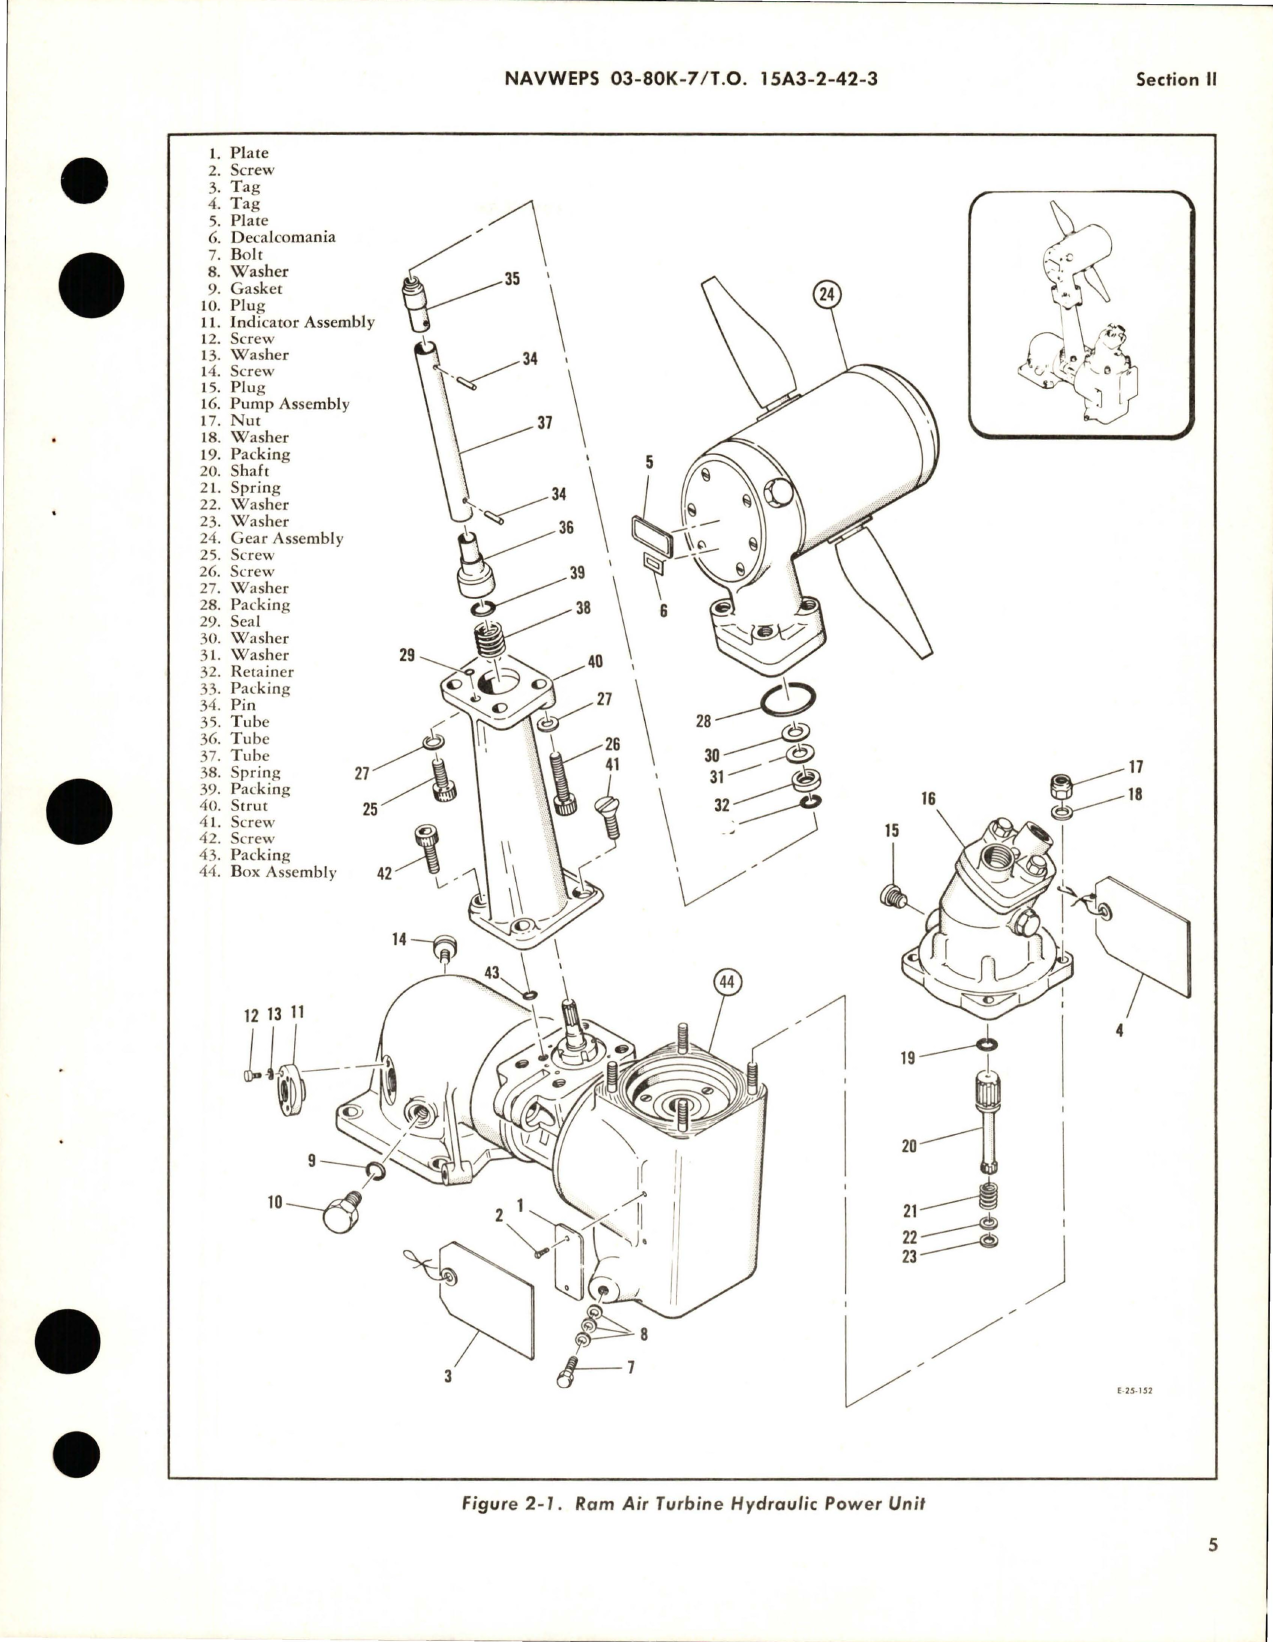 Sample page 9 from AirCorps Library document: Overhaul Instructions for Ram Air Turbine Hydraulic Power Unit - Part 549984-1